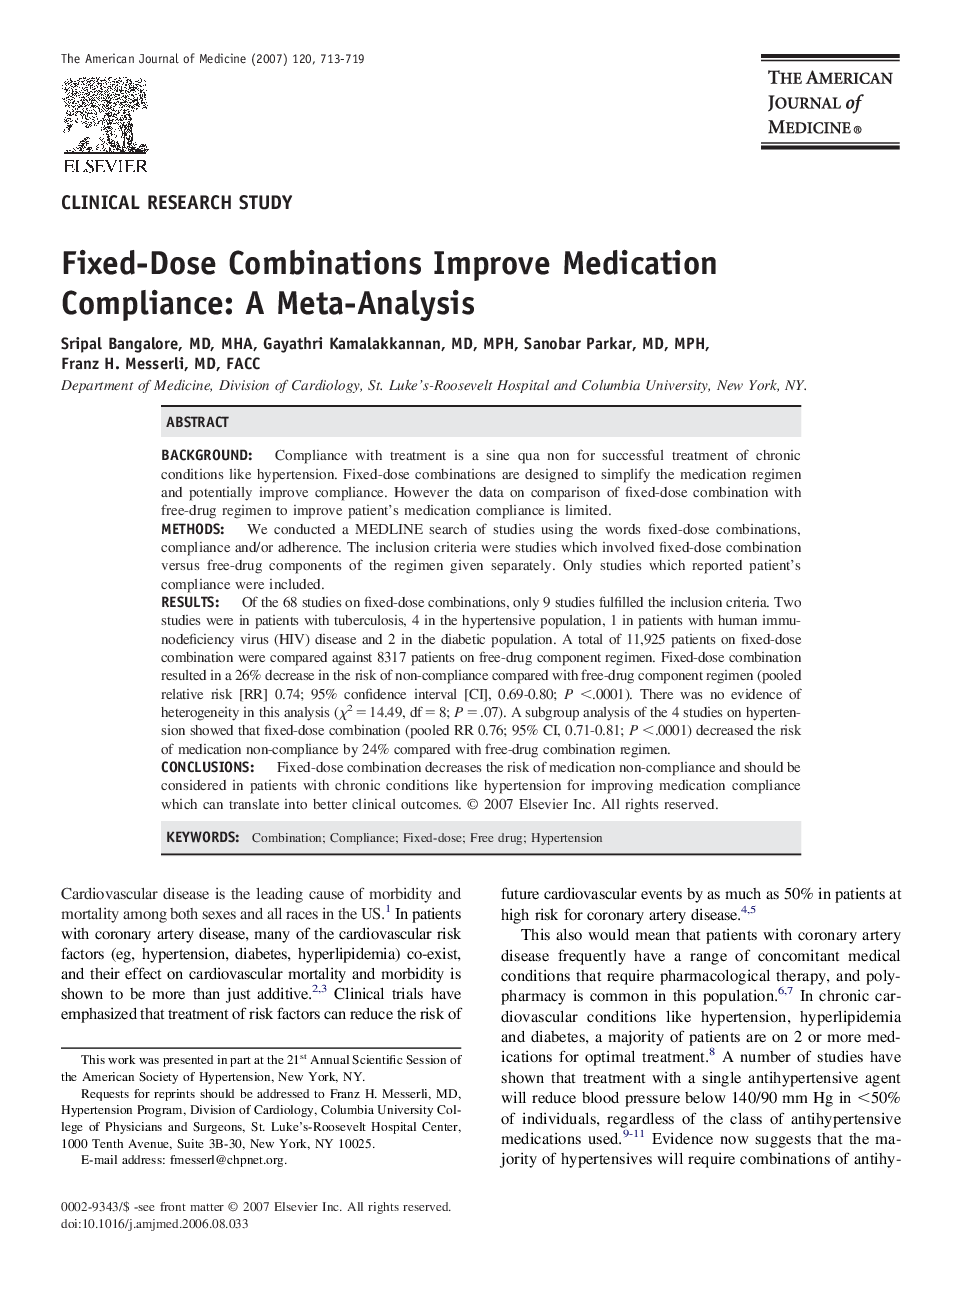 Fixed-Dose Combinations Improve Medication Compliance: A Meta-Analysis